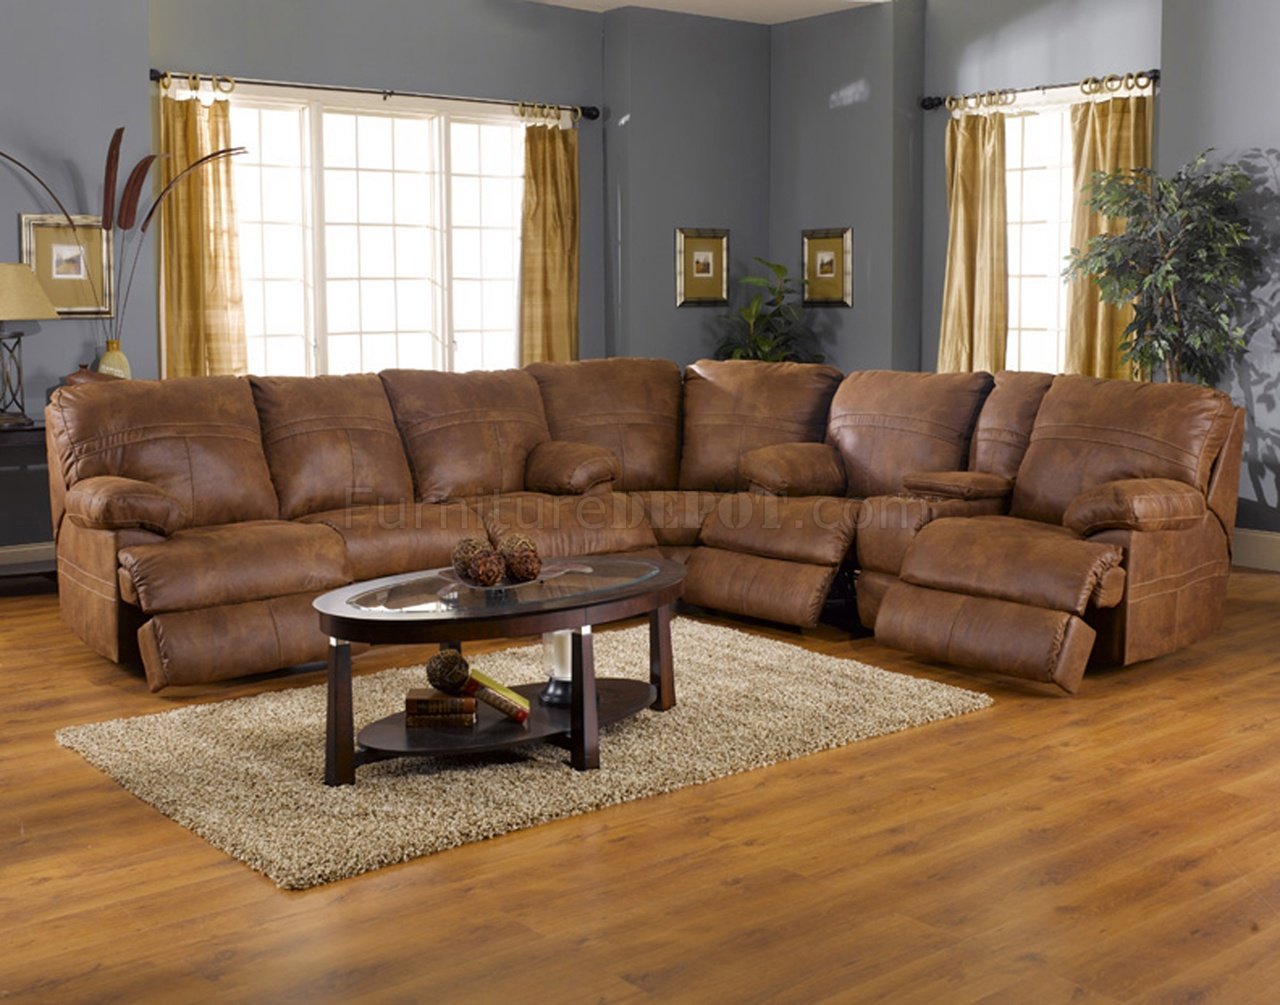 Rich Tanner Faux Leather Fabric Ranger, Modern Sectional Sofa With Recliner